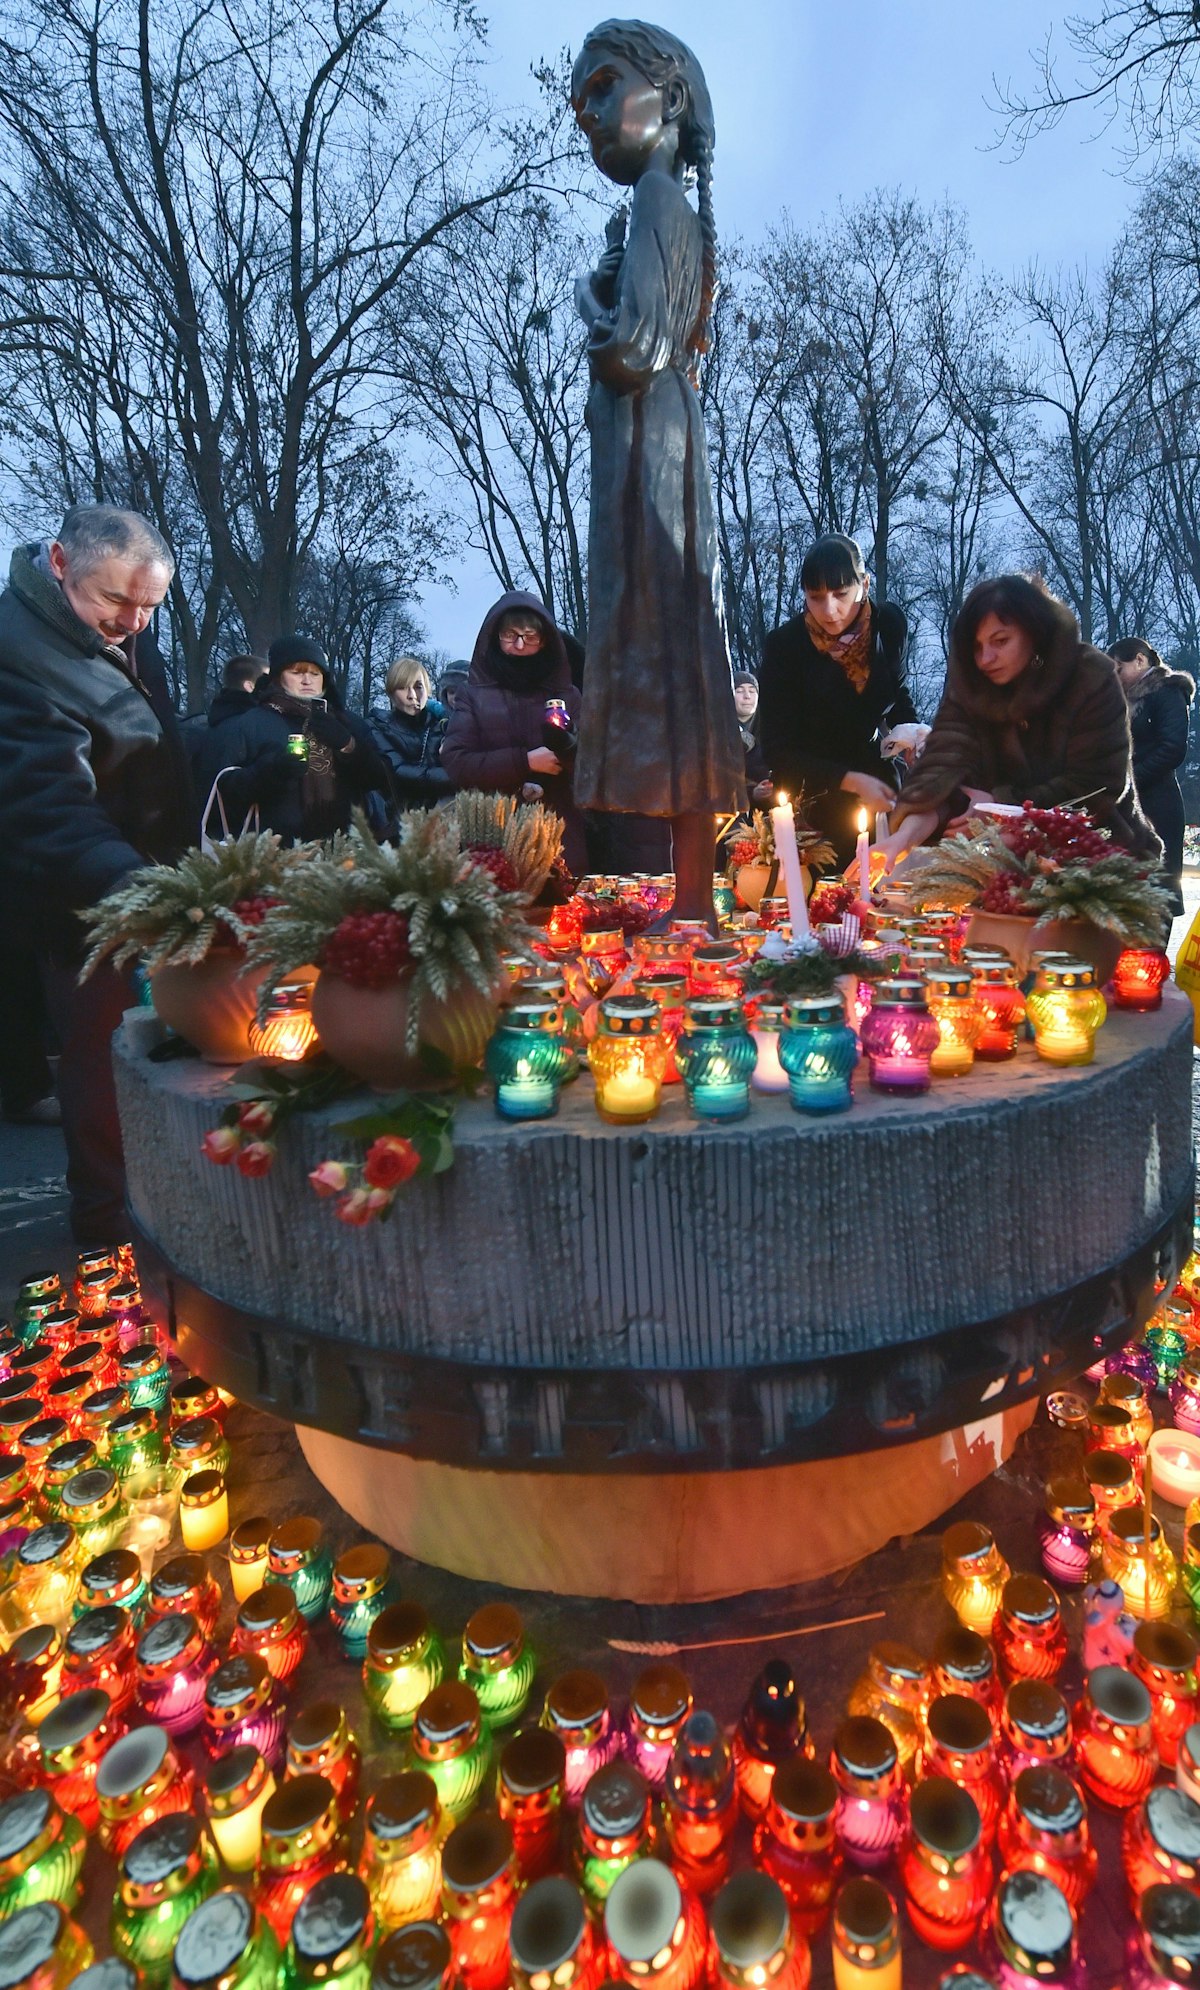 Ukrainians place candles in memory of the victims of the Holodomor famine during a ceremony at the Holodomor memorial in Kiev on November 22, 2014. Ukraine marked 81 years since the Stalin-era Holodomor famine, one of the darkest pages in its entire history that left millions dead and which is regarded by many as a genocide. The 1932-33 famine took place as harvests dwindled and Soviet leader Josef Stalin's police enforced the brutal policy of collectivising agriculture by requisitioning grain and other foodstuffs. AFP PHOTO/ SERGEI SUPINSKY        (Photo credit should read SERGEI SUPINSKY/AFP/Getty Images)